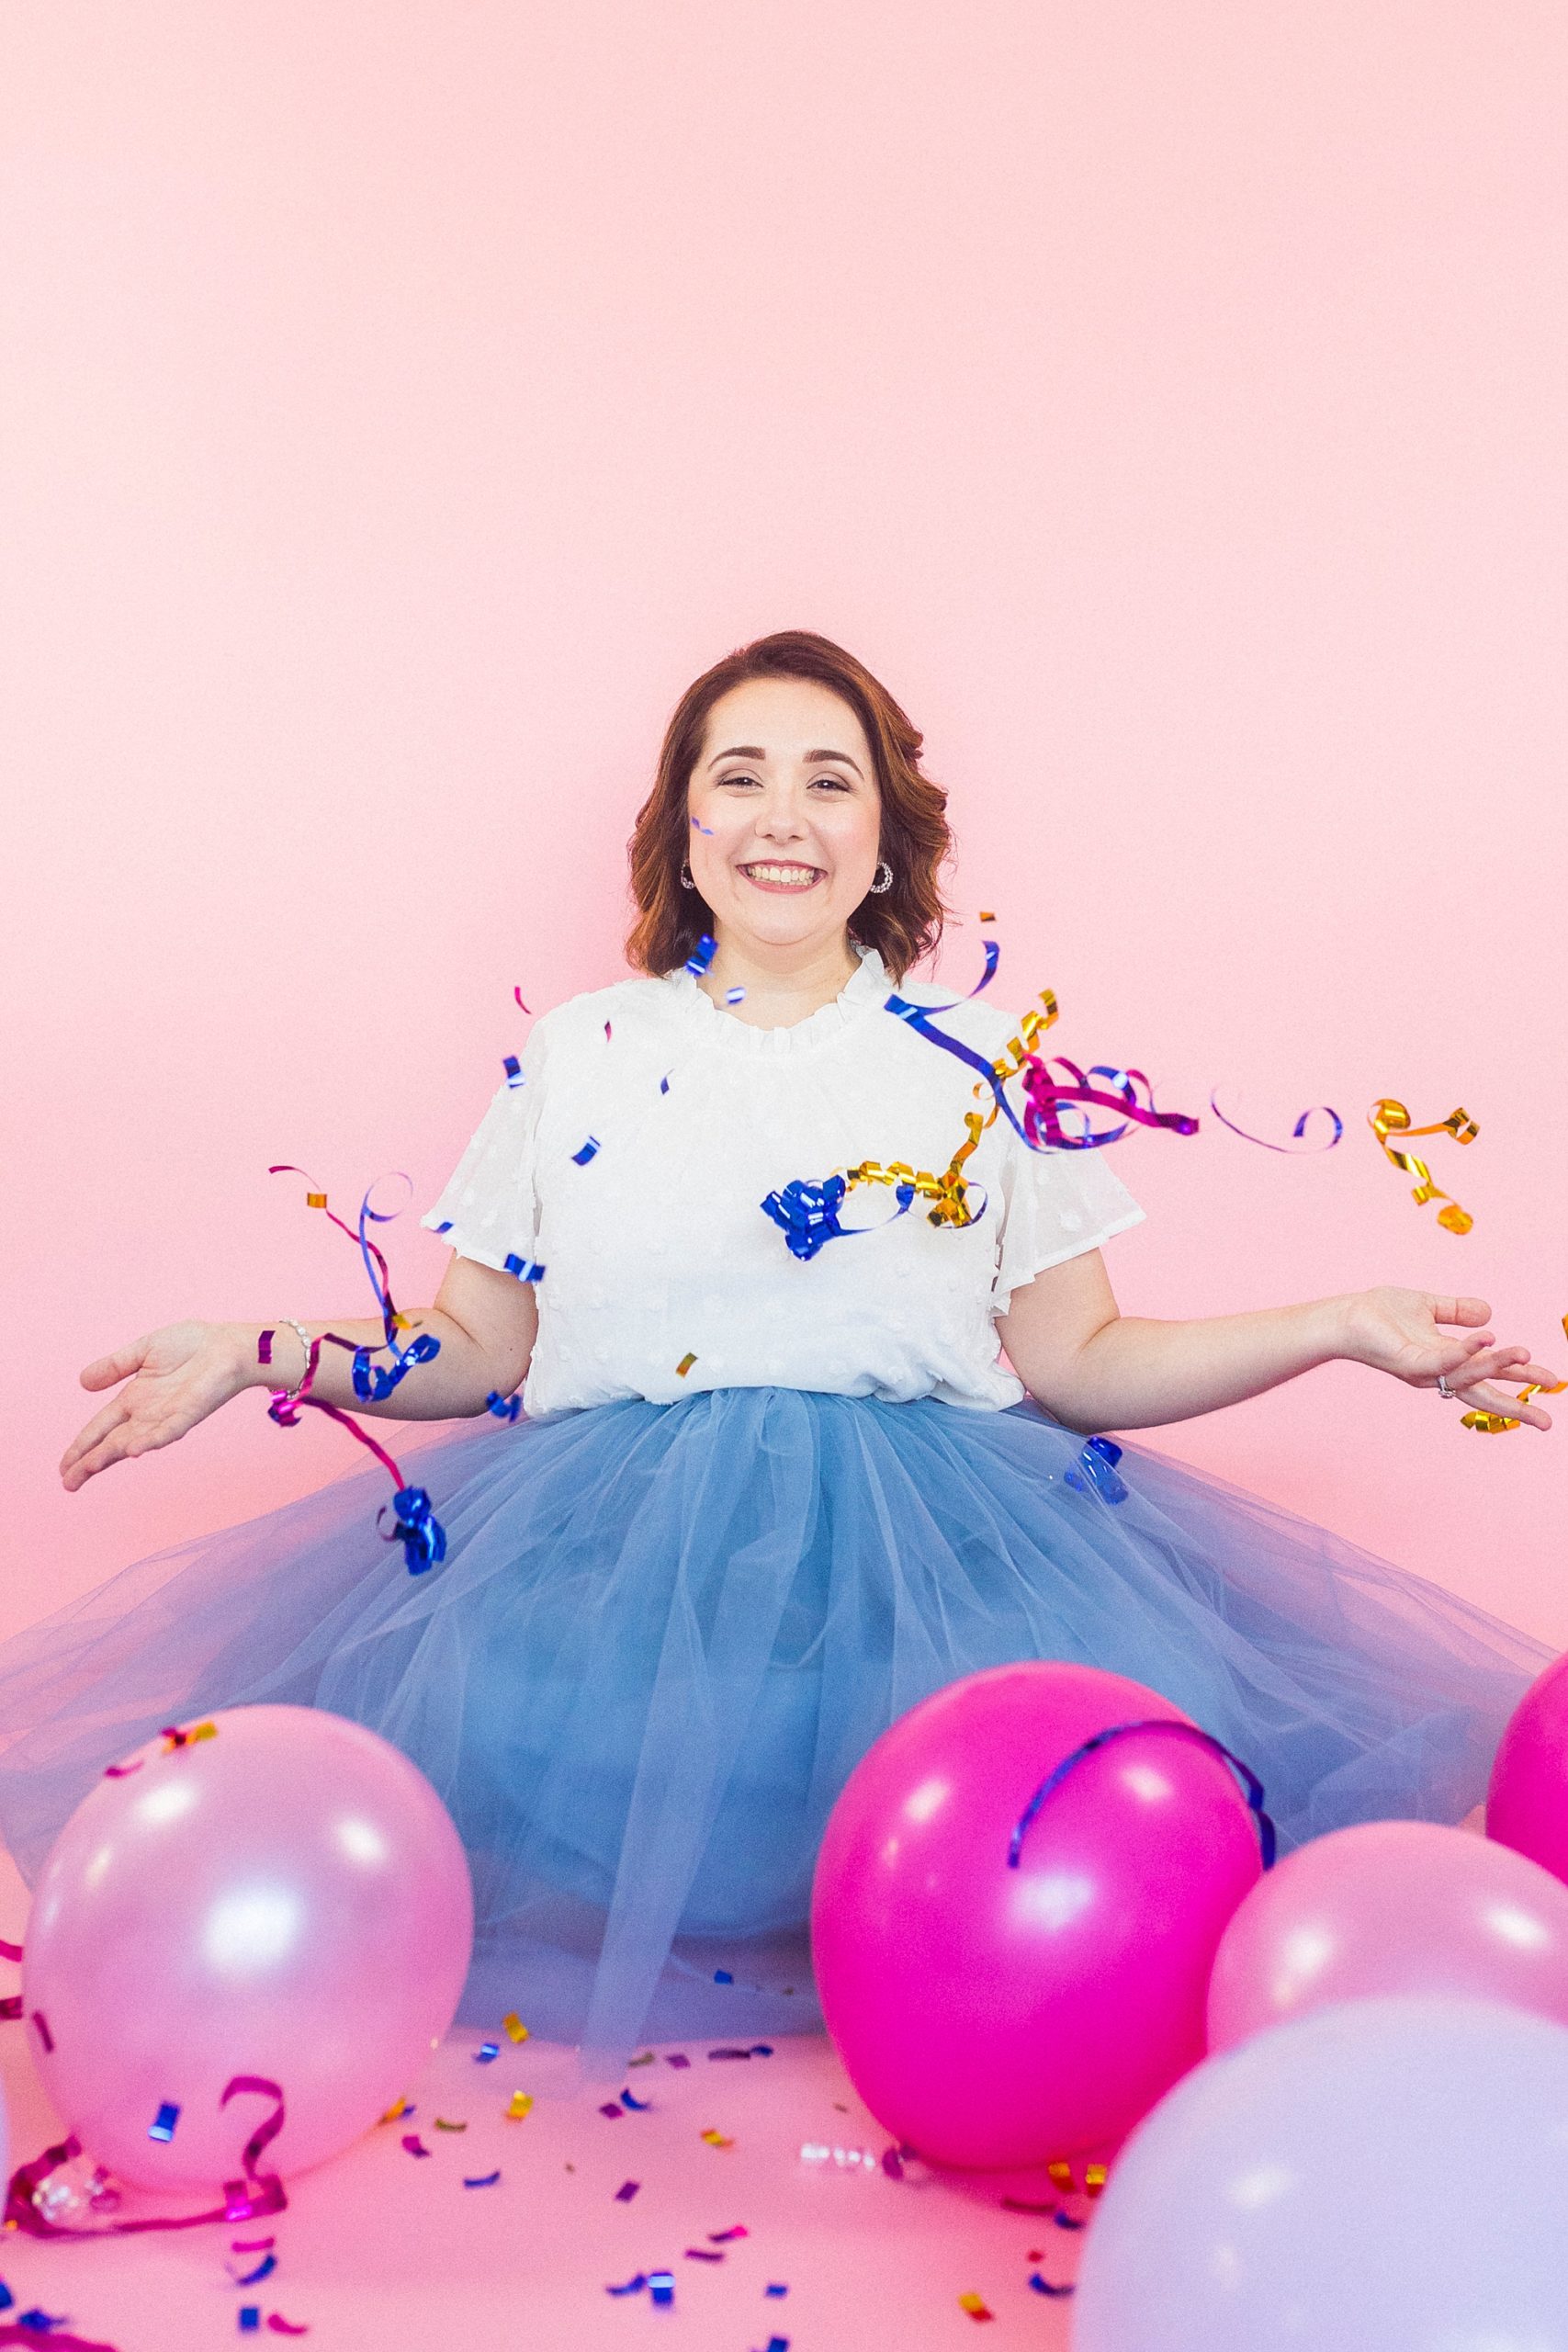 woman tosses confetti during 30th birthday portraits on pink backdrop